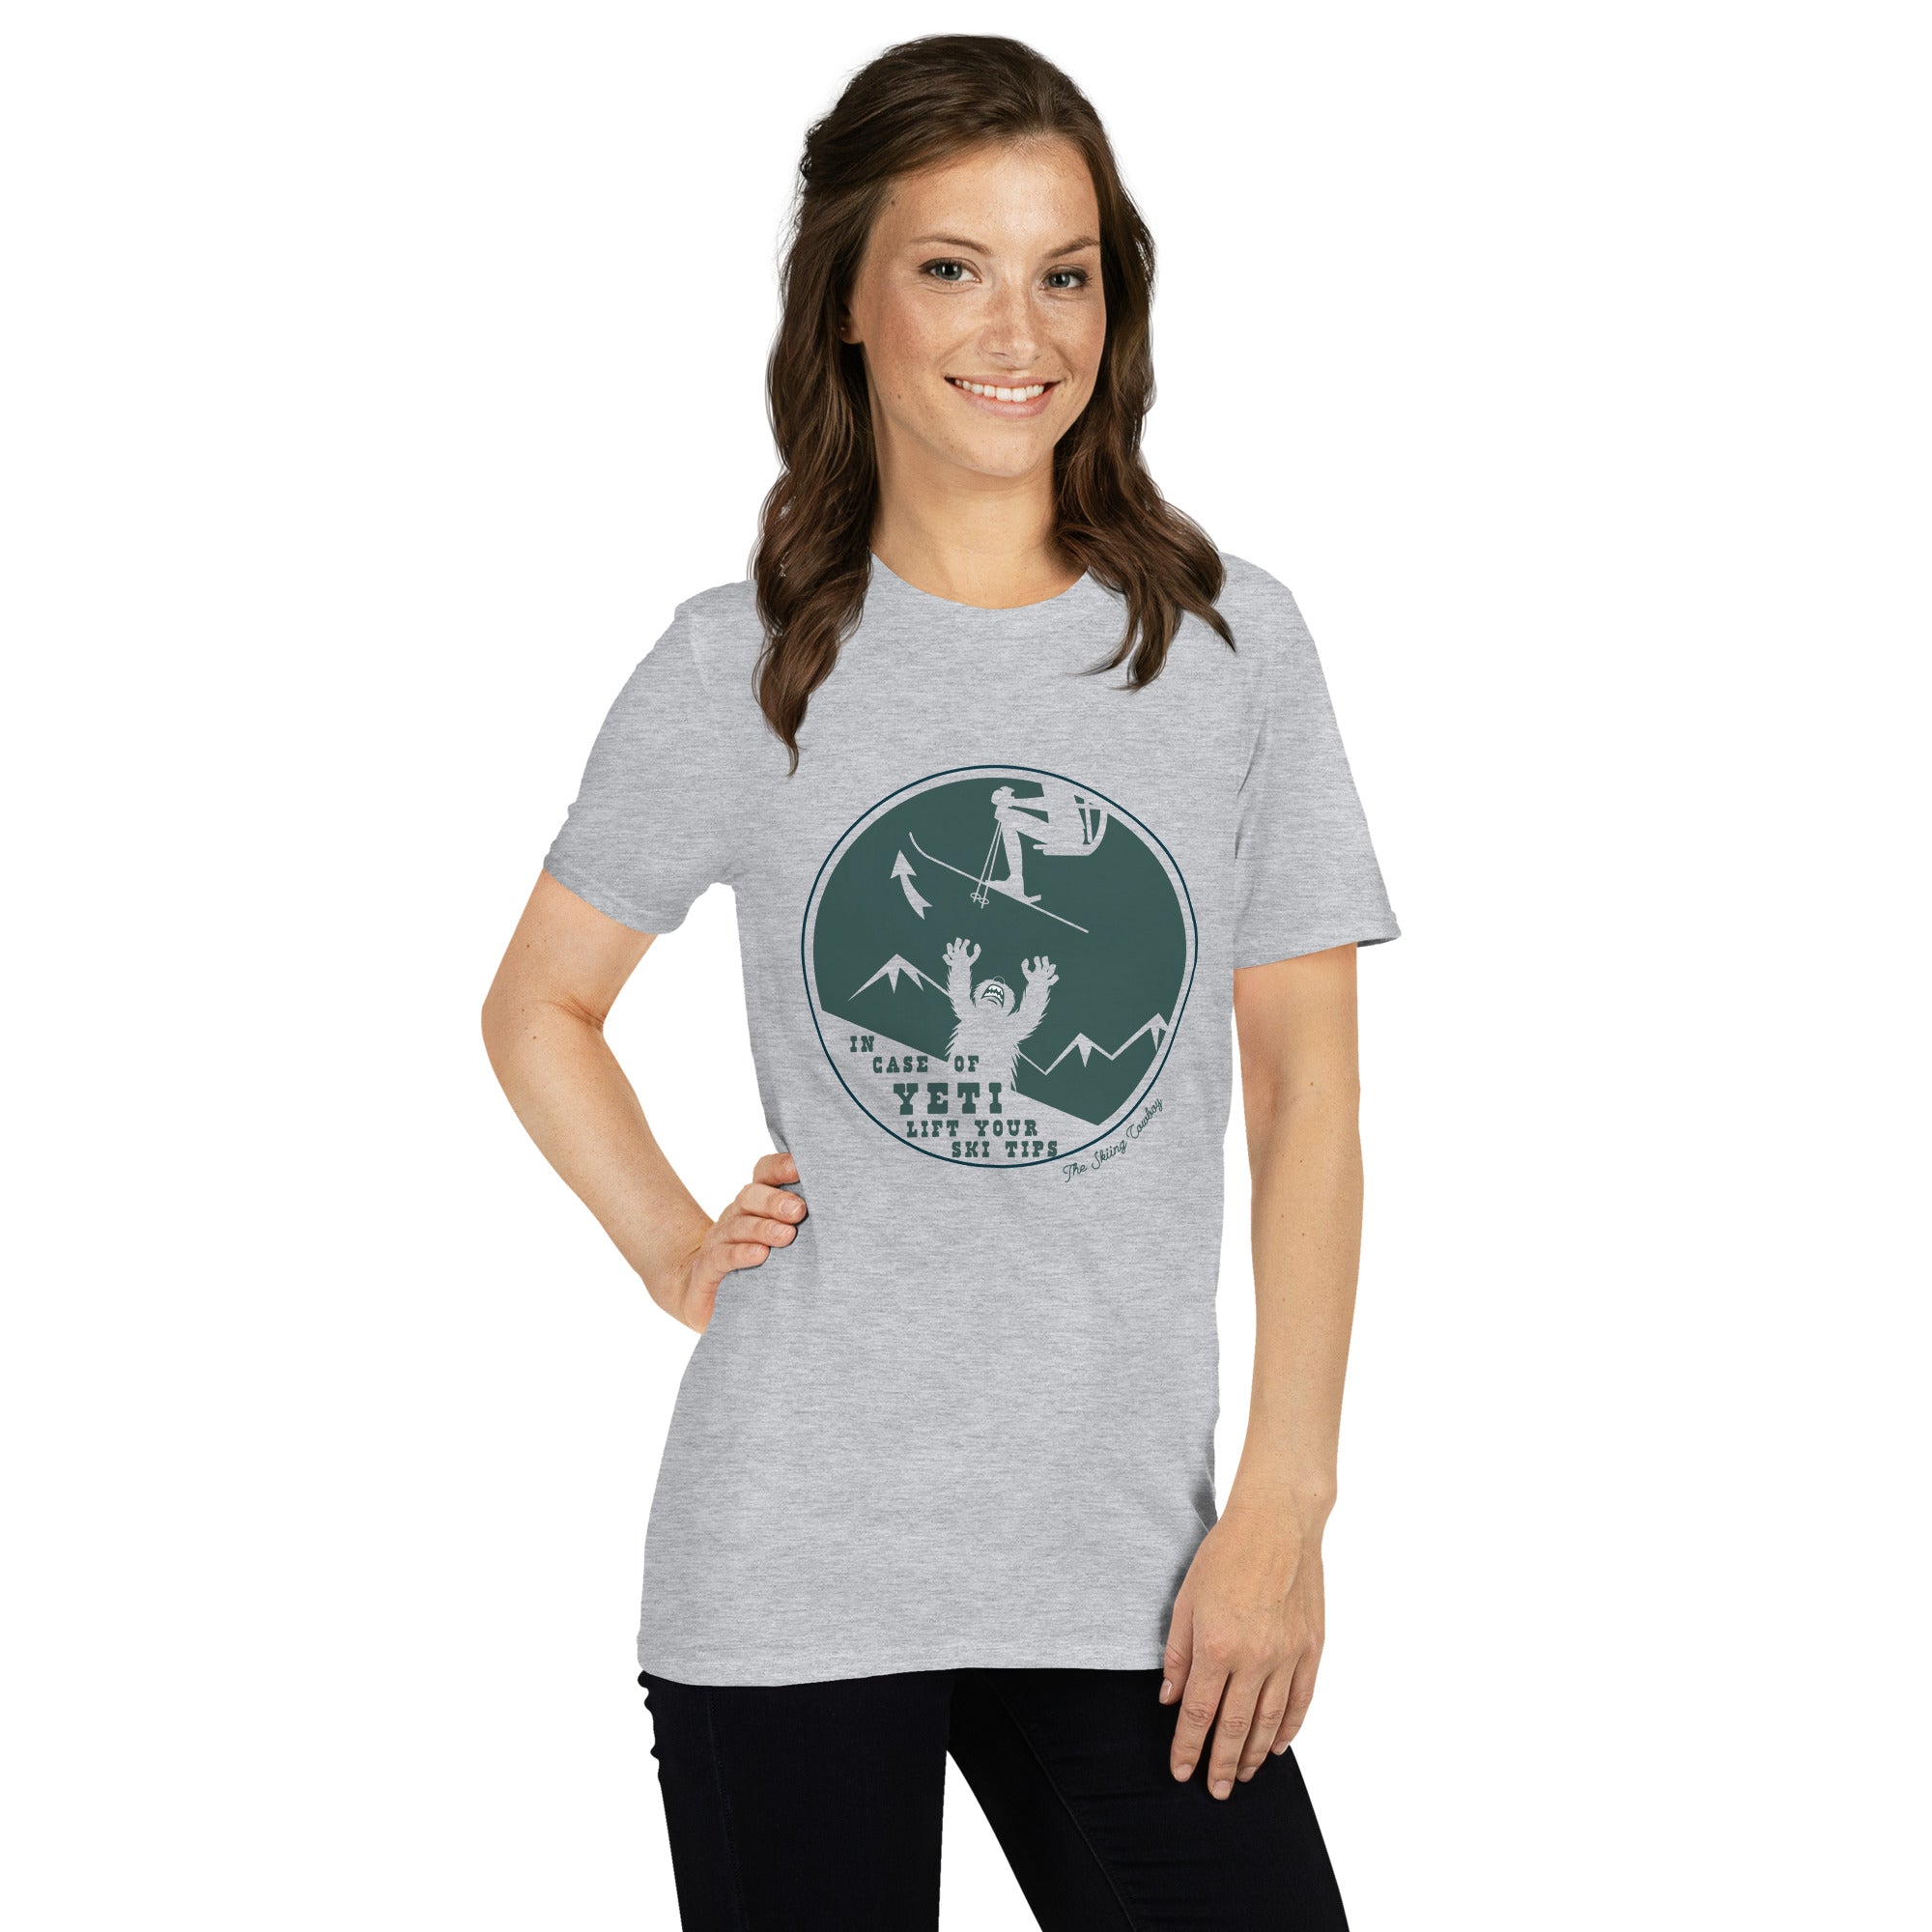 T-shirt softstyle en coton In case of Yeti, lift your ski tips